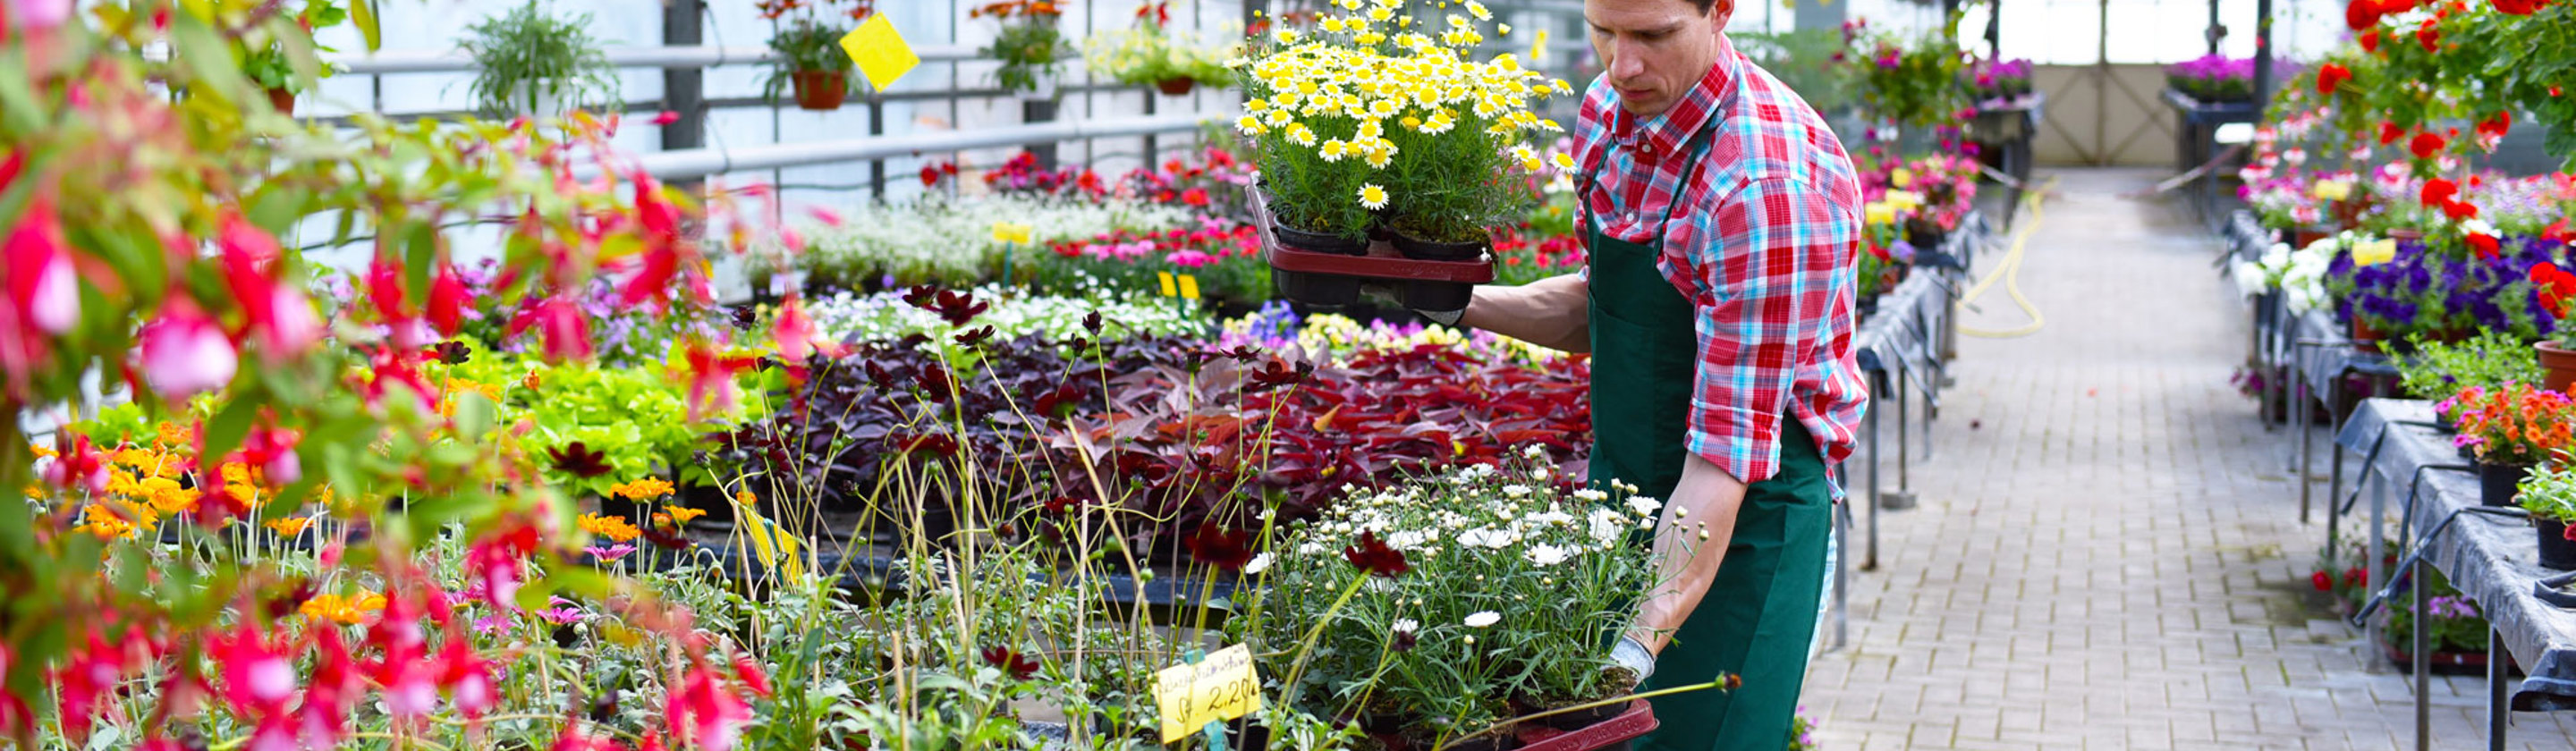 A person placing a tray of flowers down inside of a greenhouse full of other plants and flowers